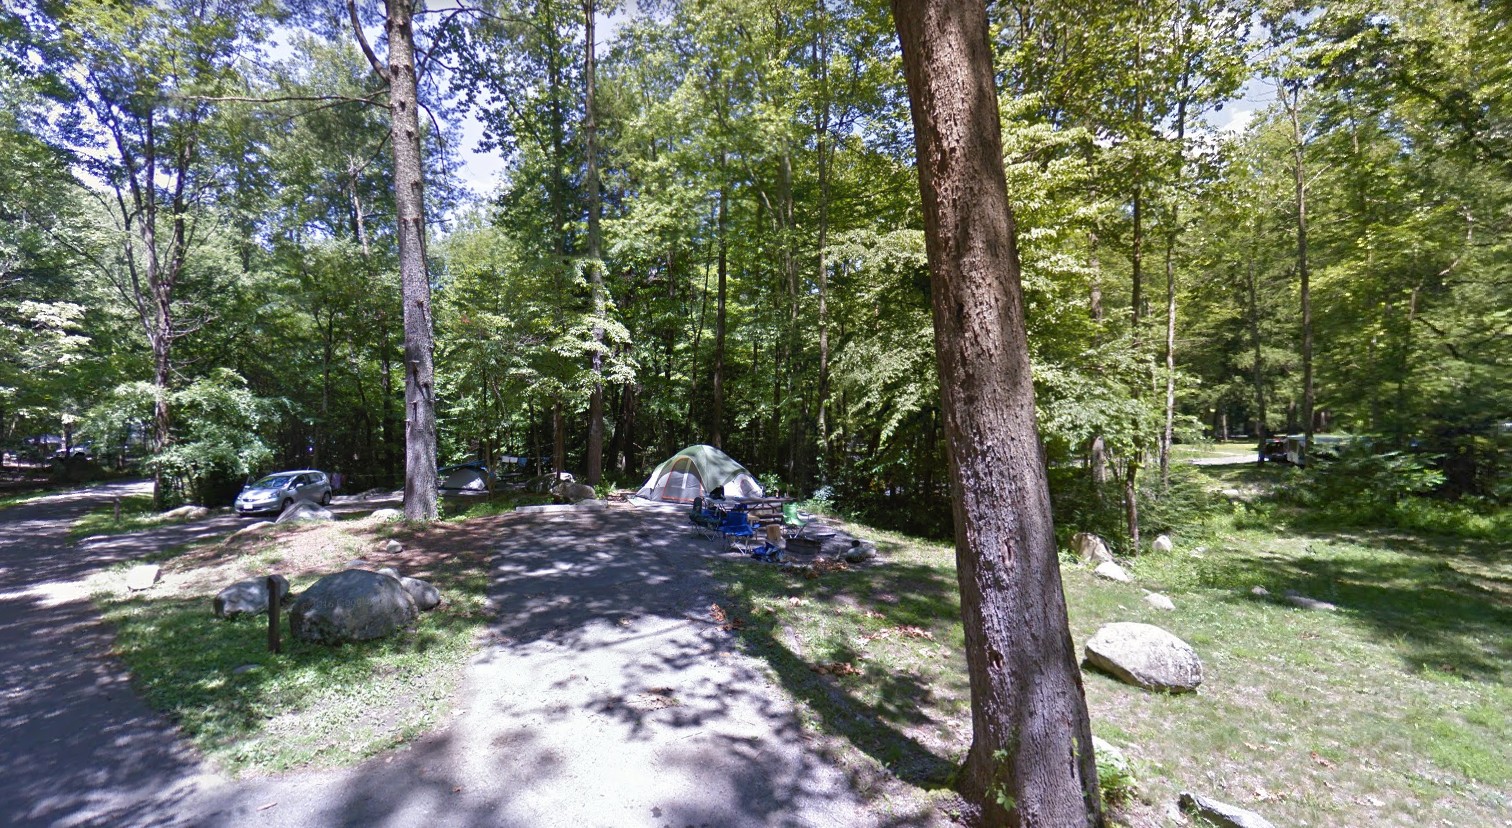 Elkmont Campground Area - the Hub of Many Scenic Attractions